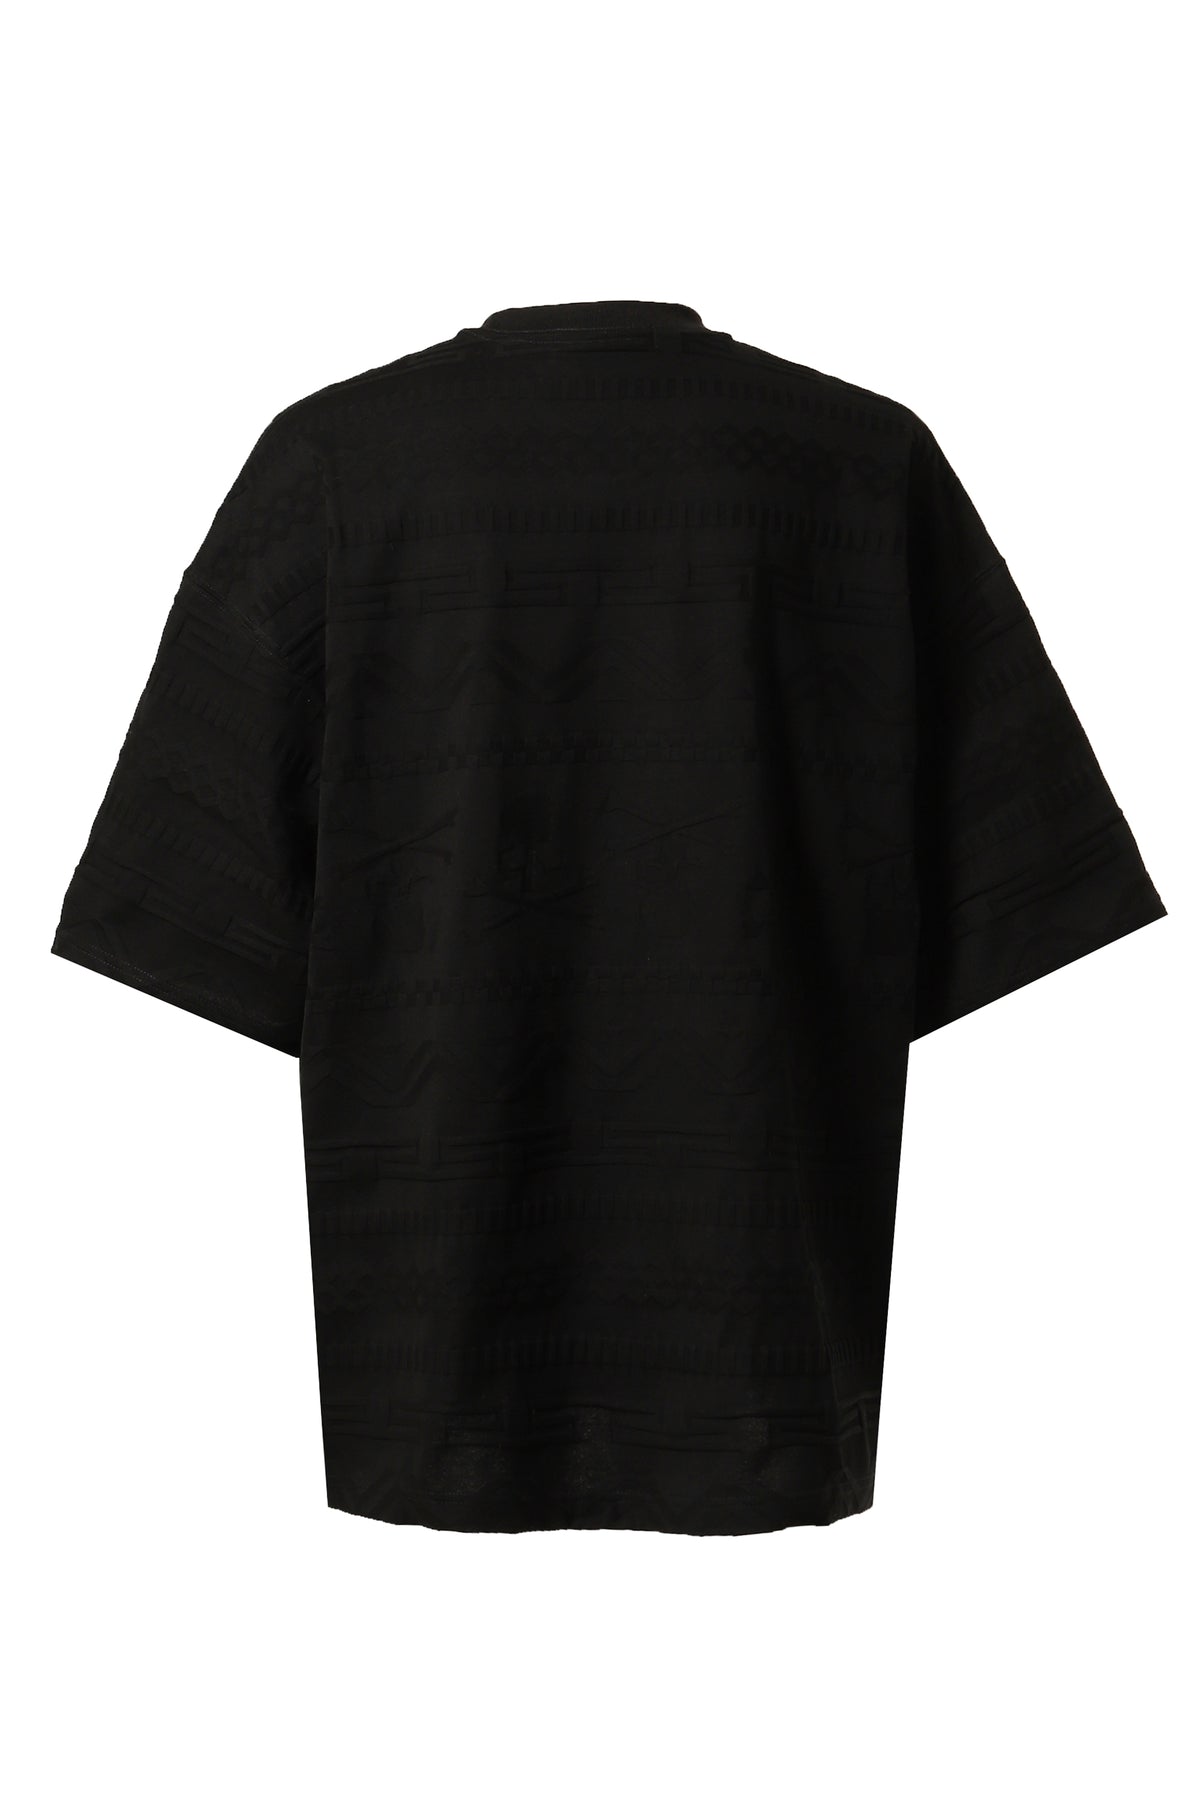 LINKS JACQUARD TEE (BOXY FIT) / BLK